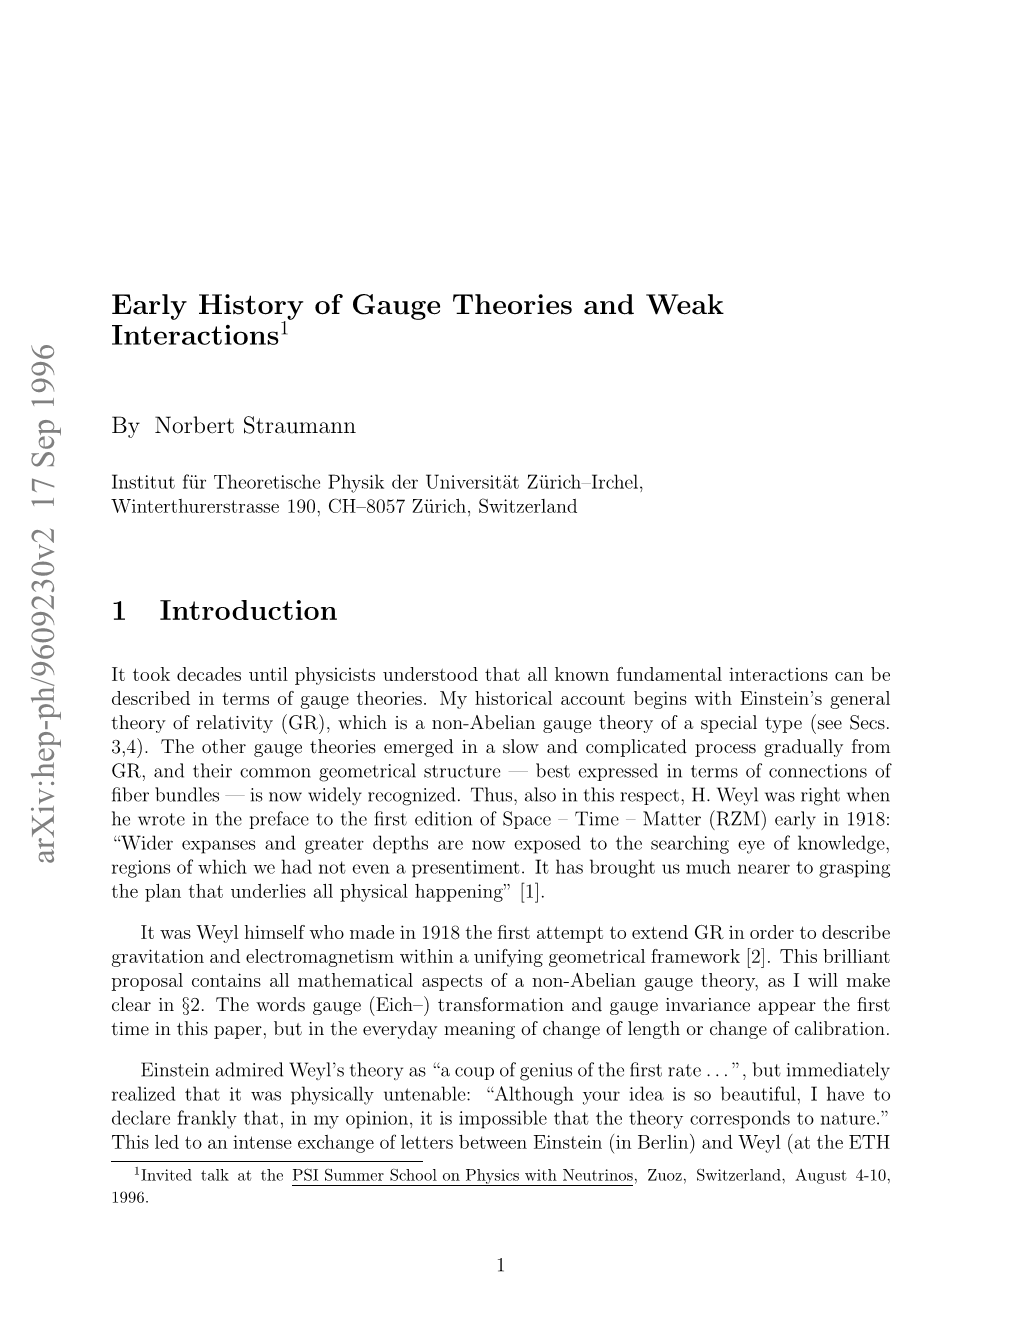 Early History of Gauge Theories and Weak Interactions